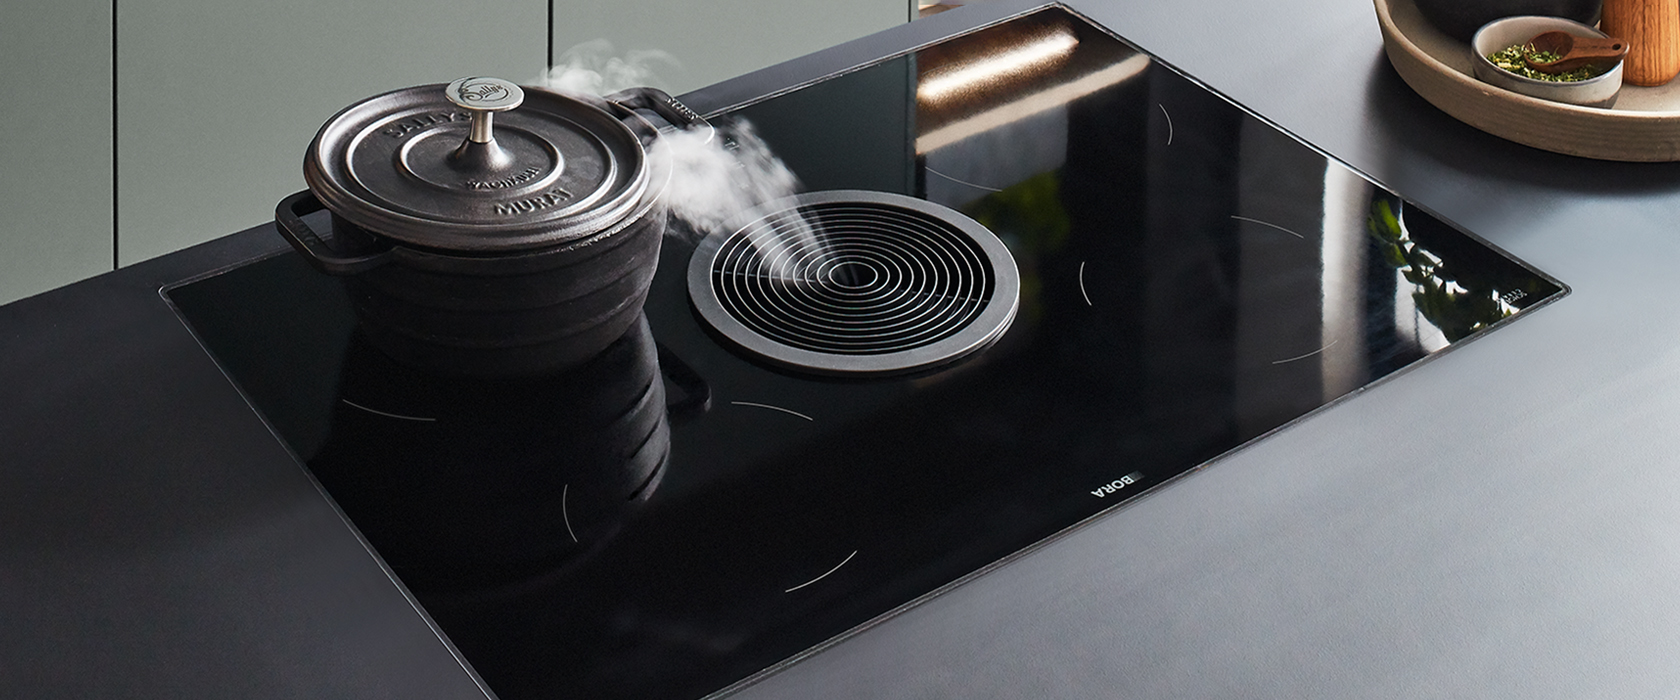 Sleek, modern induction cooktop featuring an active cooking pot, with steam rising, set in a contemporary kitchen with subtle earthy tones.